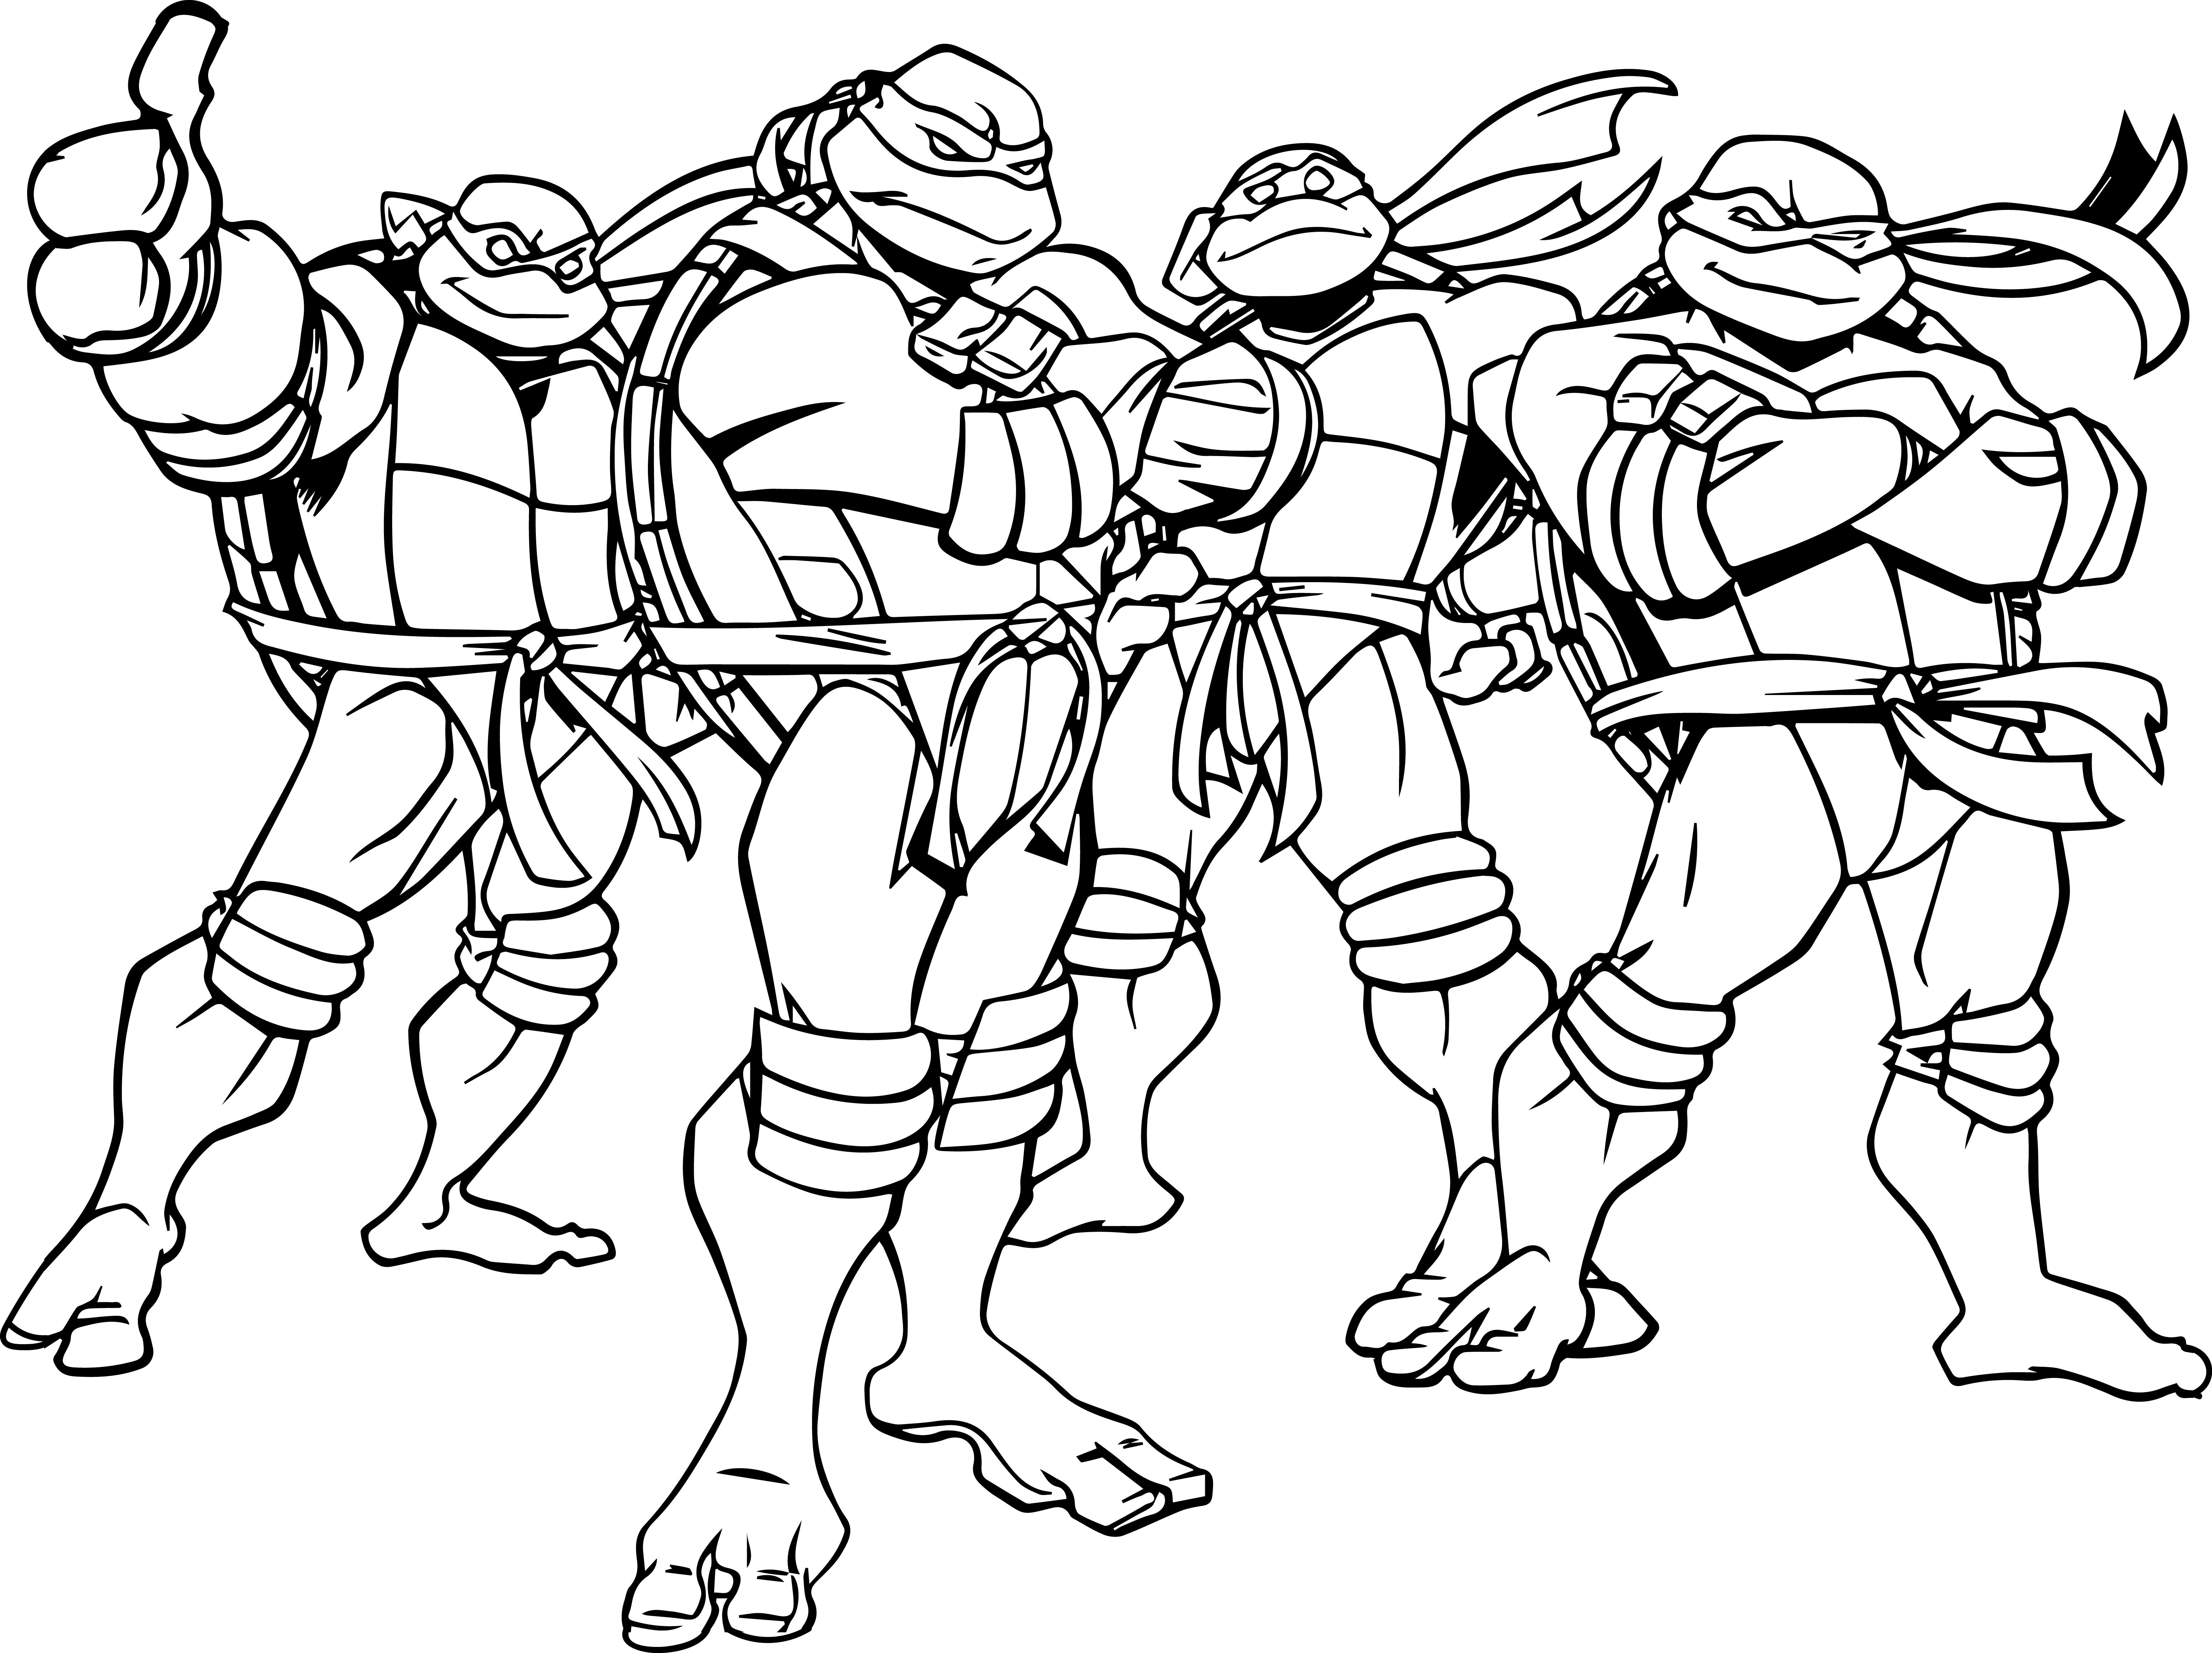 Ninja Turtle Coloring Pages Pdf at GetColorings.com | Free ...